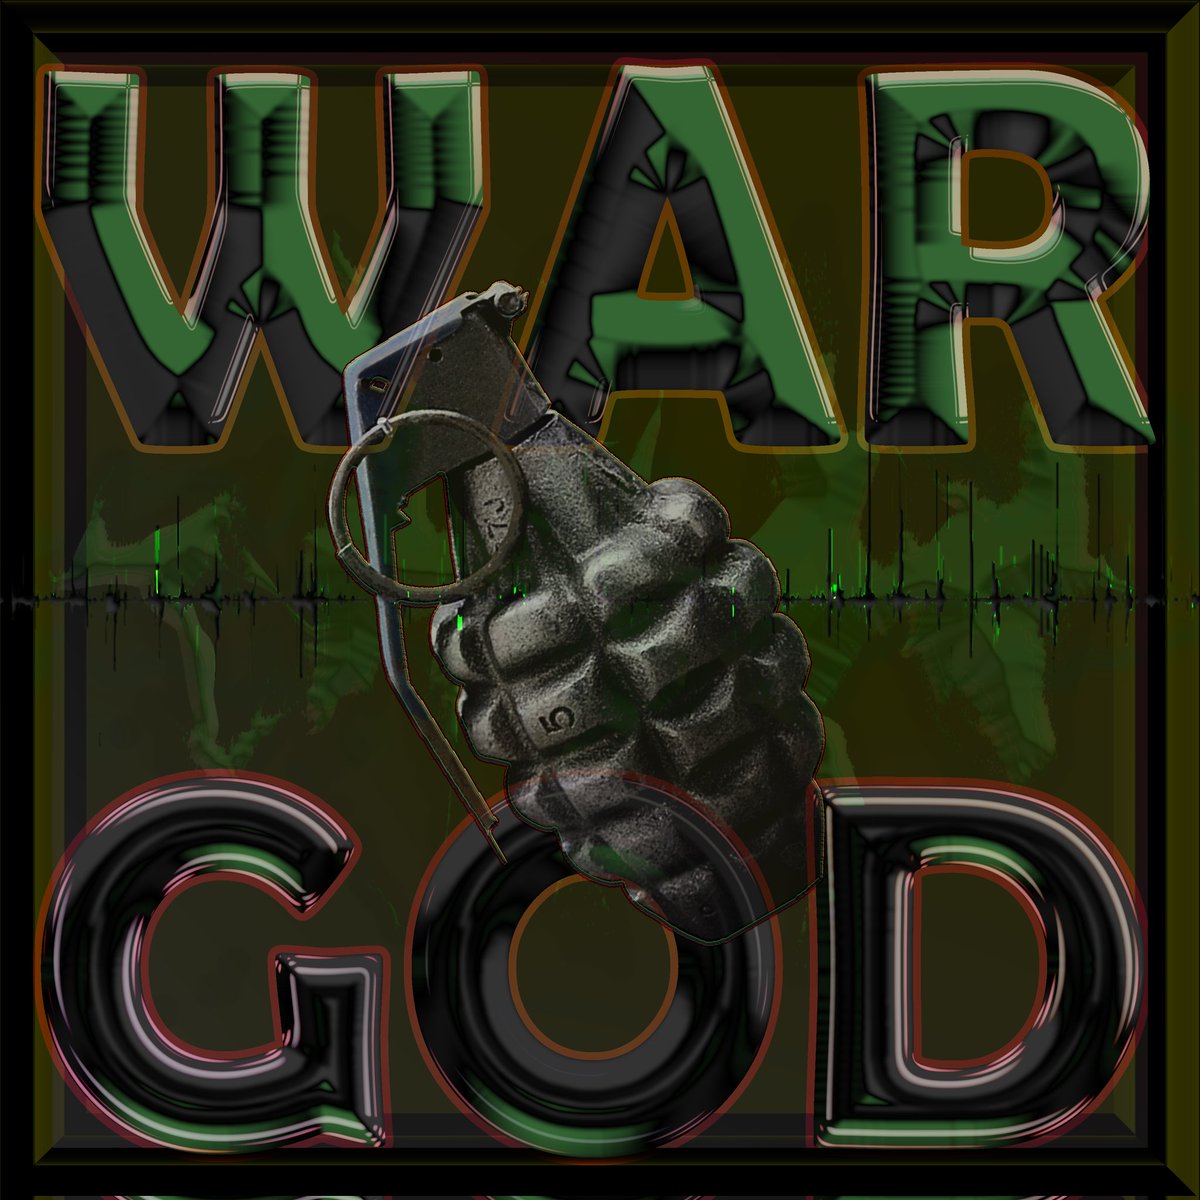 WAR GOD: 100 Bars Of Guns.. Bombs.. Knives And Madness..

#benghazzie #music #dancehall #Indie #100bars #artist